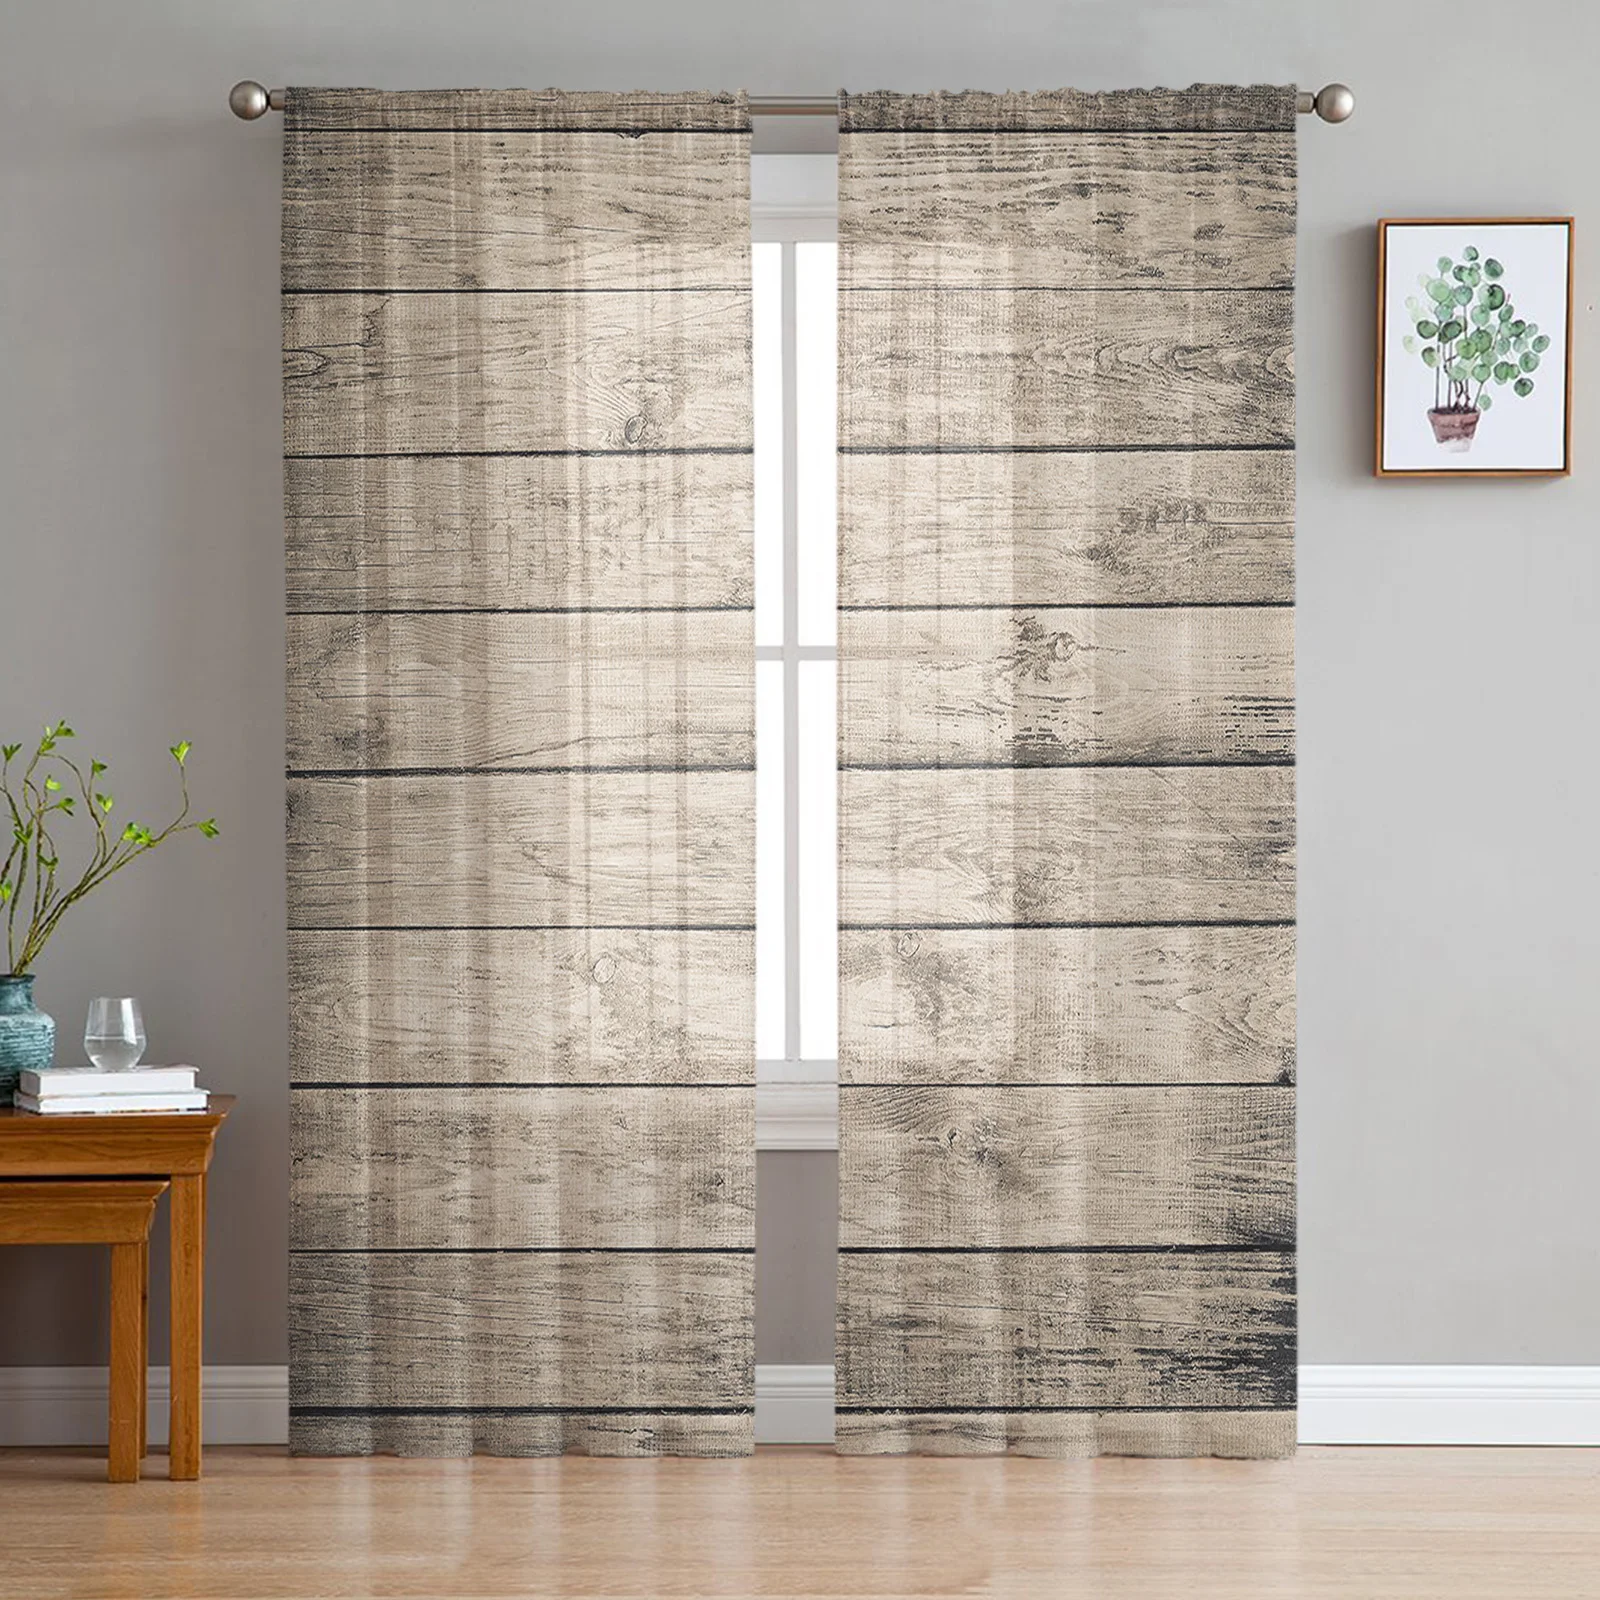 

Wood Plank Texture Tulle Curtains for Living Room Printed Sheer Voile Curtain Bedroom Window Screening Drapes Blinds Home Decor